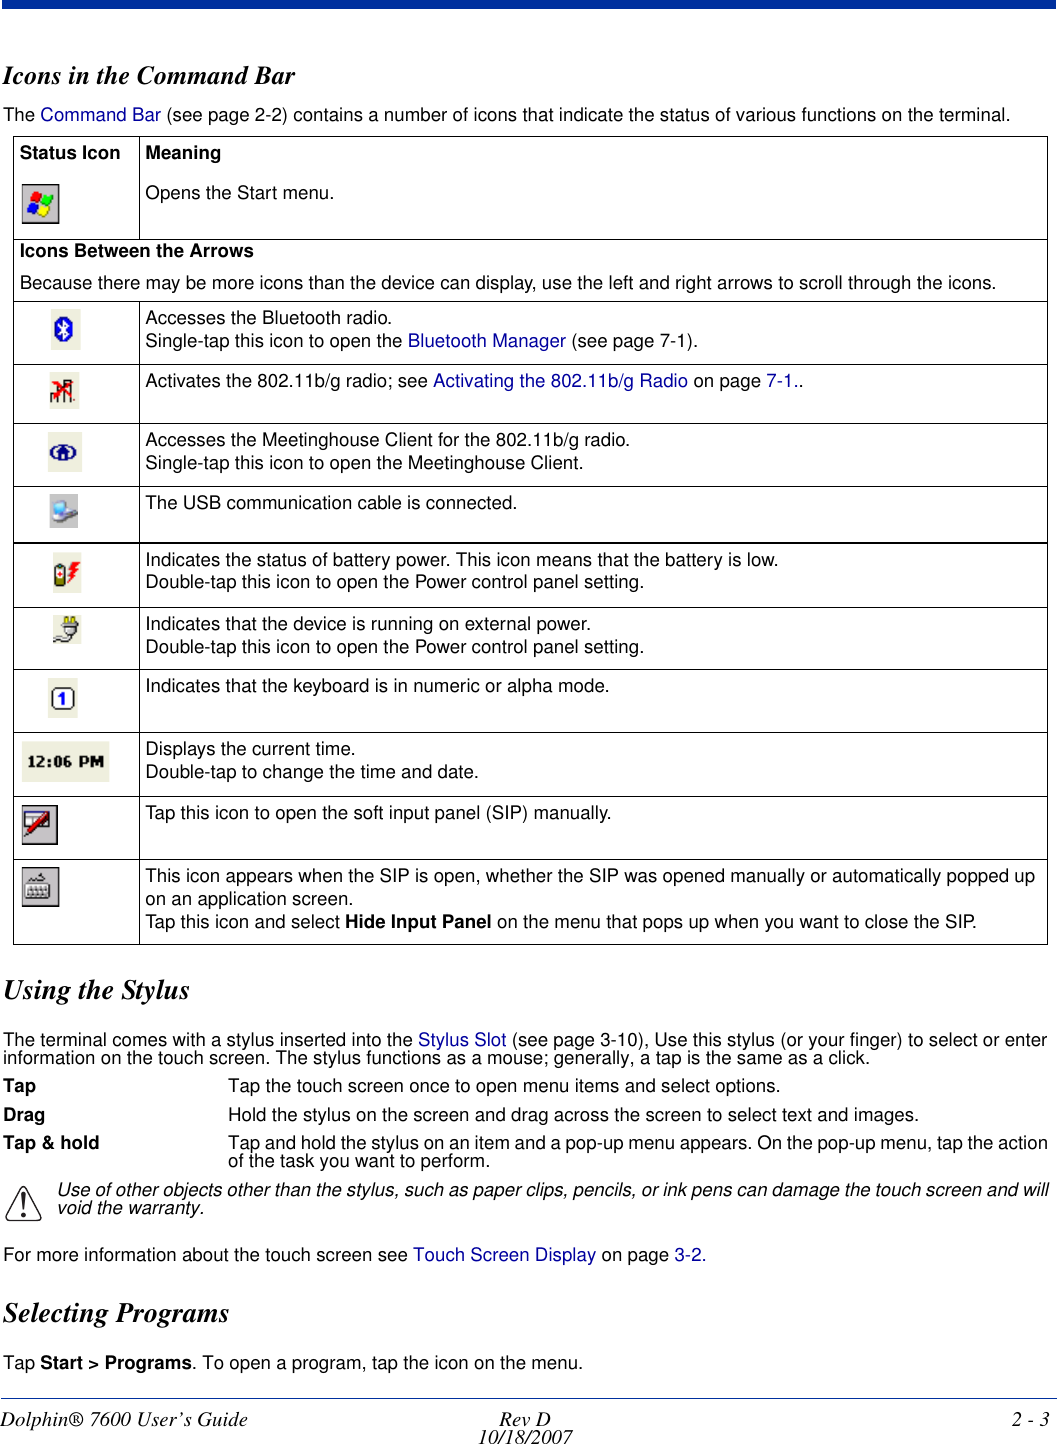 Dolphin® 7600 User’s Guide  Rev D10/18/2007 2 - 3Icons in the Command BarThe Command Bar (see page 2-2) contains a number of icons that indicate the status of various functions on the terminal.Using the StylusThe terminal comes with a stylus inserted into the Stylus Slot (see page 3-10), Use this stylus (or your finger) to select or enter information on the touch screen. The stylus functions as a mouse; generally, a tap is the same as a click.Tap Tap the touch screen once to open menu items and select options.Drag Hold the stylus on the screen and drag across the screen to select text and images.Tap &amp; hold Tap and hold the stylus on an item and a pop-up menu appears. On the pop-up menu, tap the action of the task you want to perform.Use of other objects other than the stylus, such as paper clips, pencils, or ink pens can damage the touch screen and will void the warranty.For more information about the touch screen see Touch Screen Display on page 3-2.Selecting ProgramsTap Start &gt; Programs. To open a program, tap the icon on the menu.Status Icon MeaningOpens the Start menu.Icons Between the ArrowsBecause there may be more icons than the device can display, use the left and right arrows to scroll through the icons. Accesses the Bluetooth radio. Single-tap this icon to open the Bluetooth Manager (see page 7-1).Activates the 802.11b/g radio; see Activating the 802.11b/g Radio on page 7-1..Accesses the Meetinghouse Client for the 802.11b/g radio.Single-tap this icon to open the Meetinghouse Client.The USB communication cable is connected.Indicates the status of battery power. This icon means that the battery is low. Double-tap this icon to open the Power control panel setting. Indicates that the device is running on external power. Double-tap this icon to open the Power control panel setting. Indicates that the keyboard is in numeric or alpha mode.Displays the current time.Double-tap to change the time and date.Tap this icon to open the soft input panel (SIP) manually.This icon appears when the SIP is open, whether the SIP was opened manually or automatically popped up on an application screen. Tap this icon and select Hide Input Panel on the menu that pops up when you want to close the SIP.!